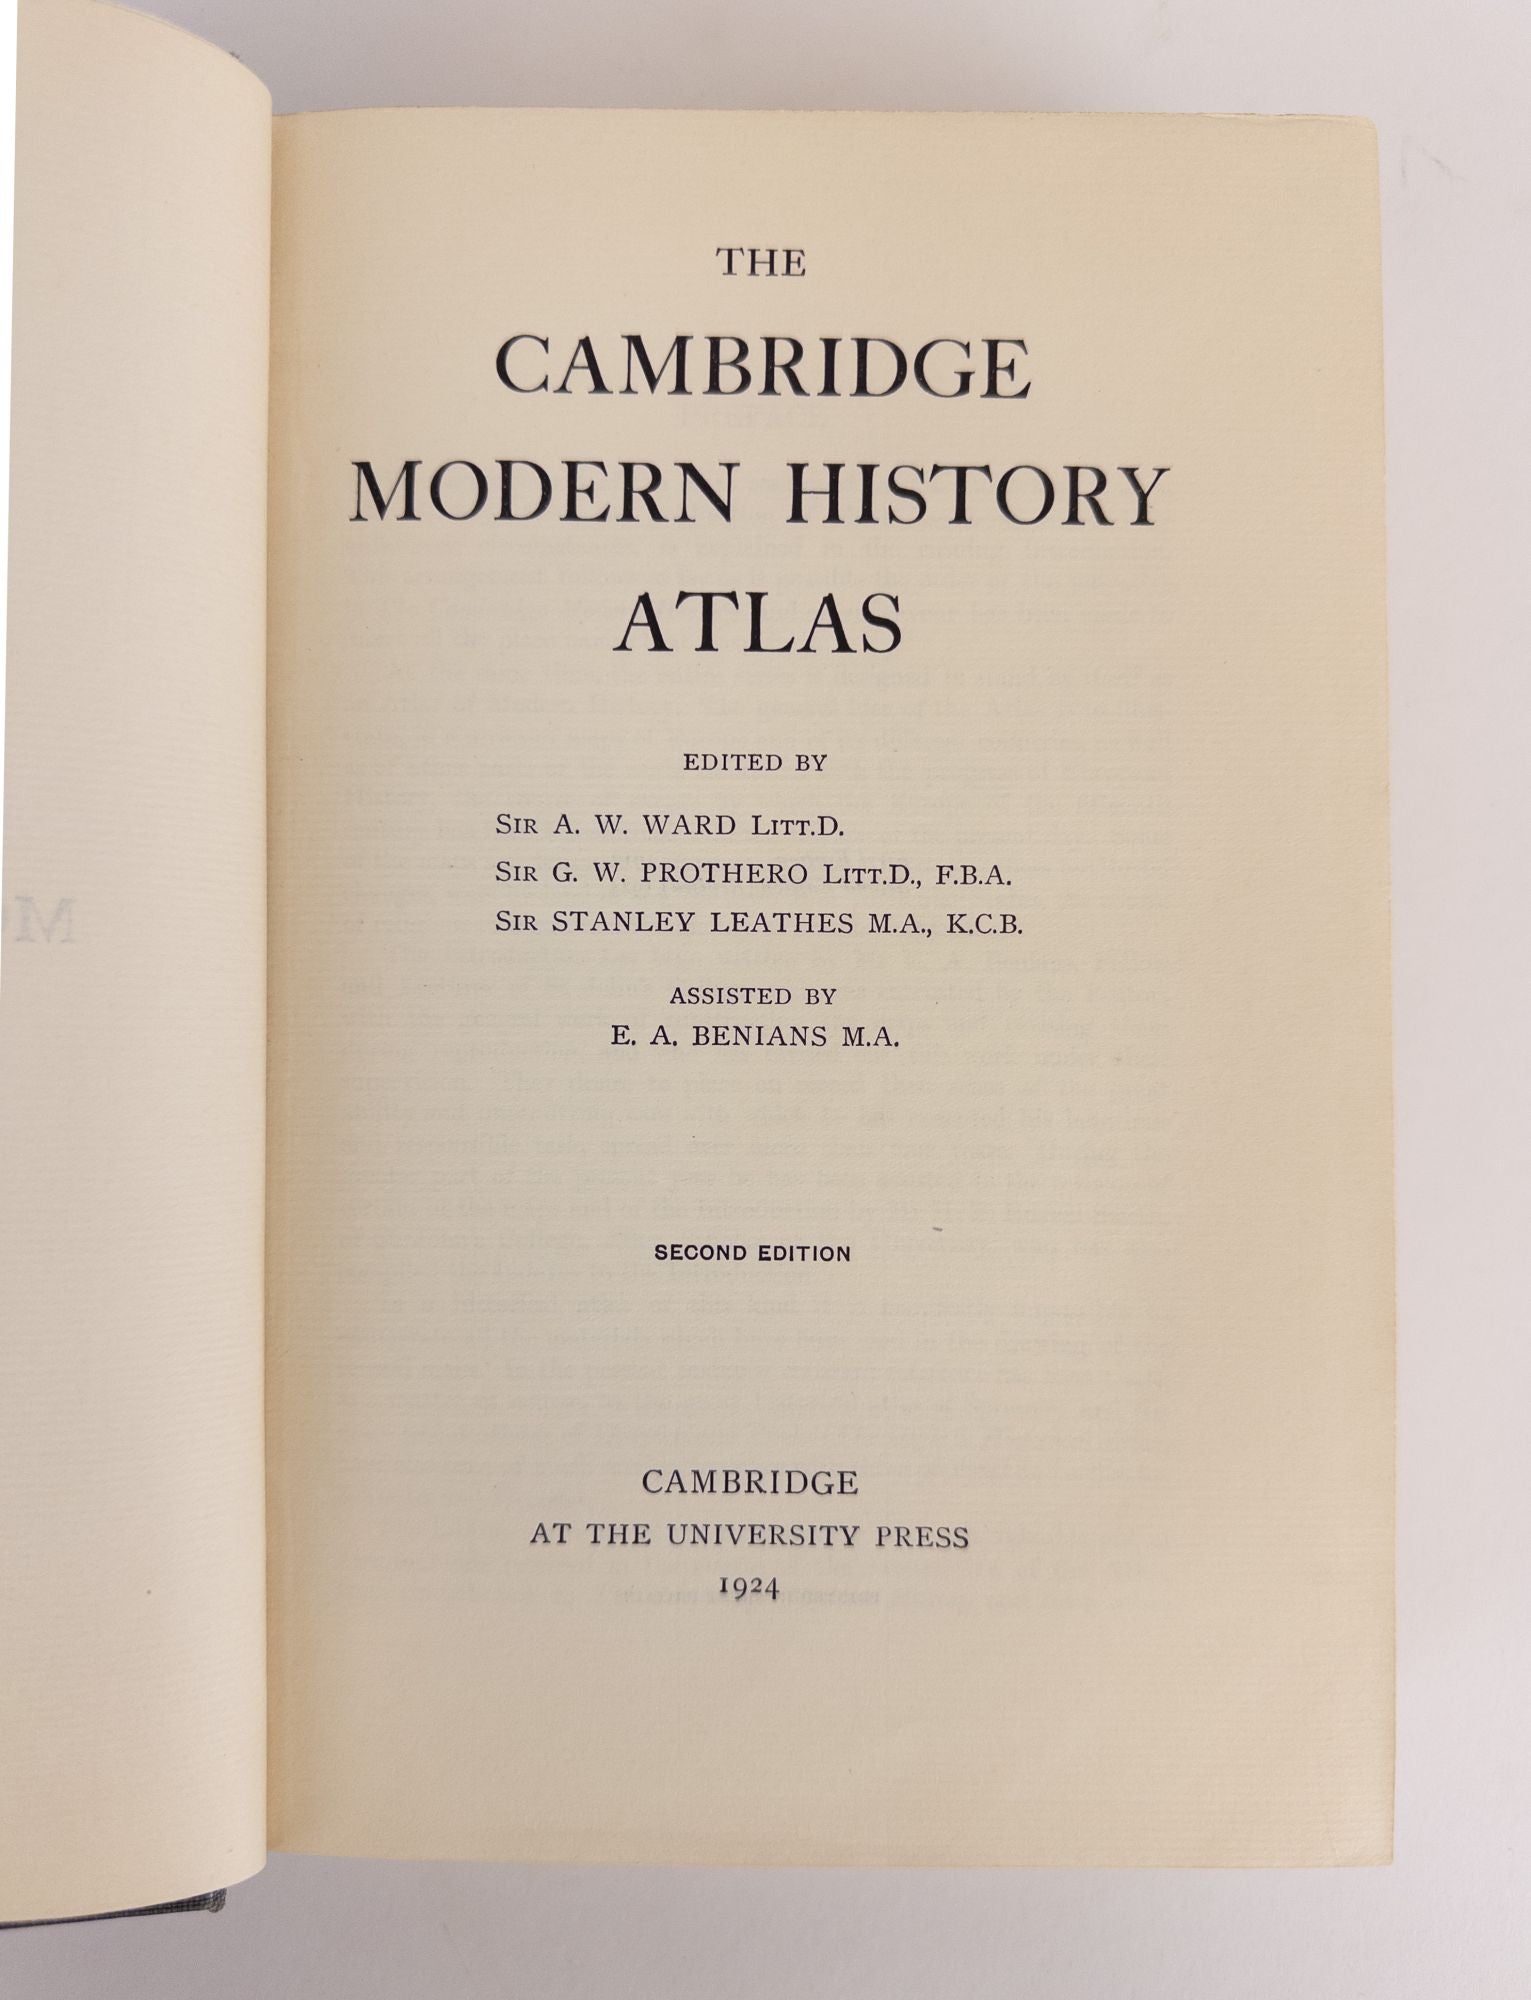 Product Image for THE CAMBRIDGE MODERN HISTORY ATLAS